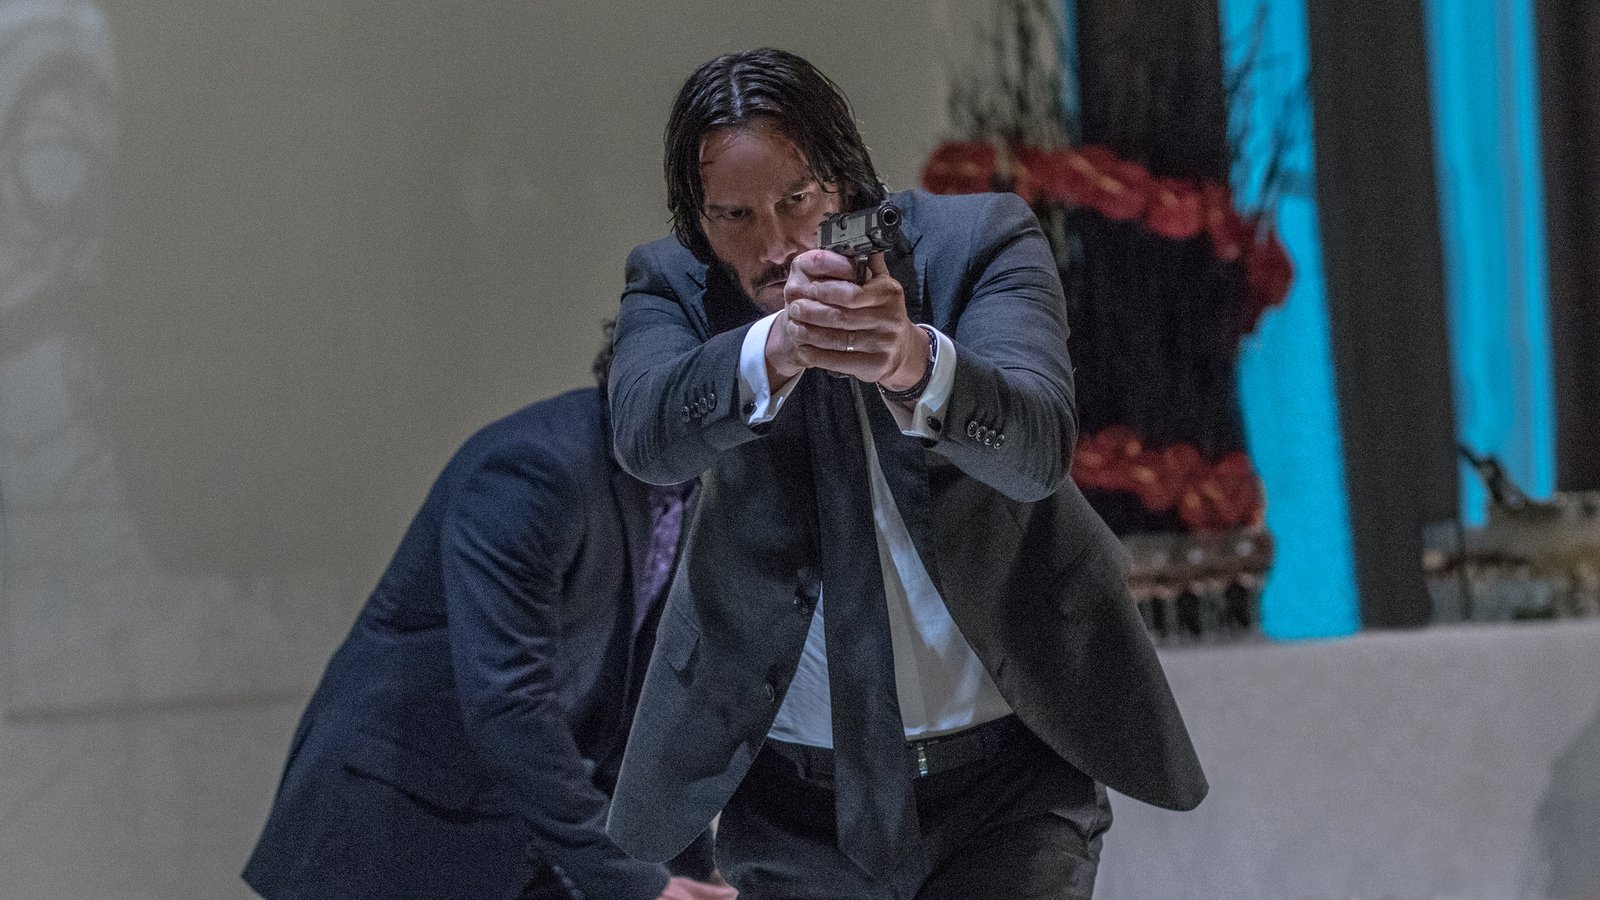 John Wick: Chapter 2 review